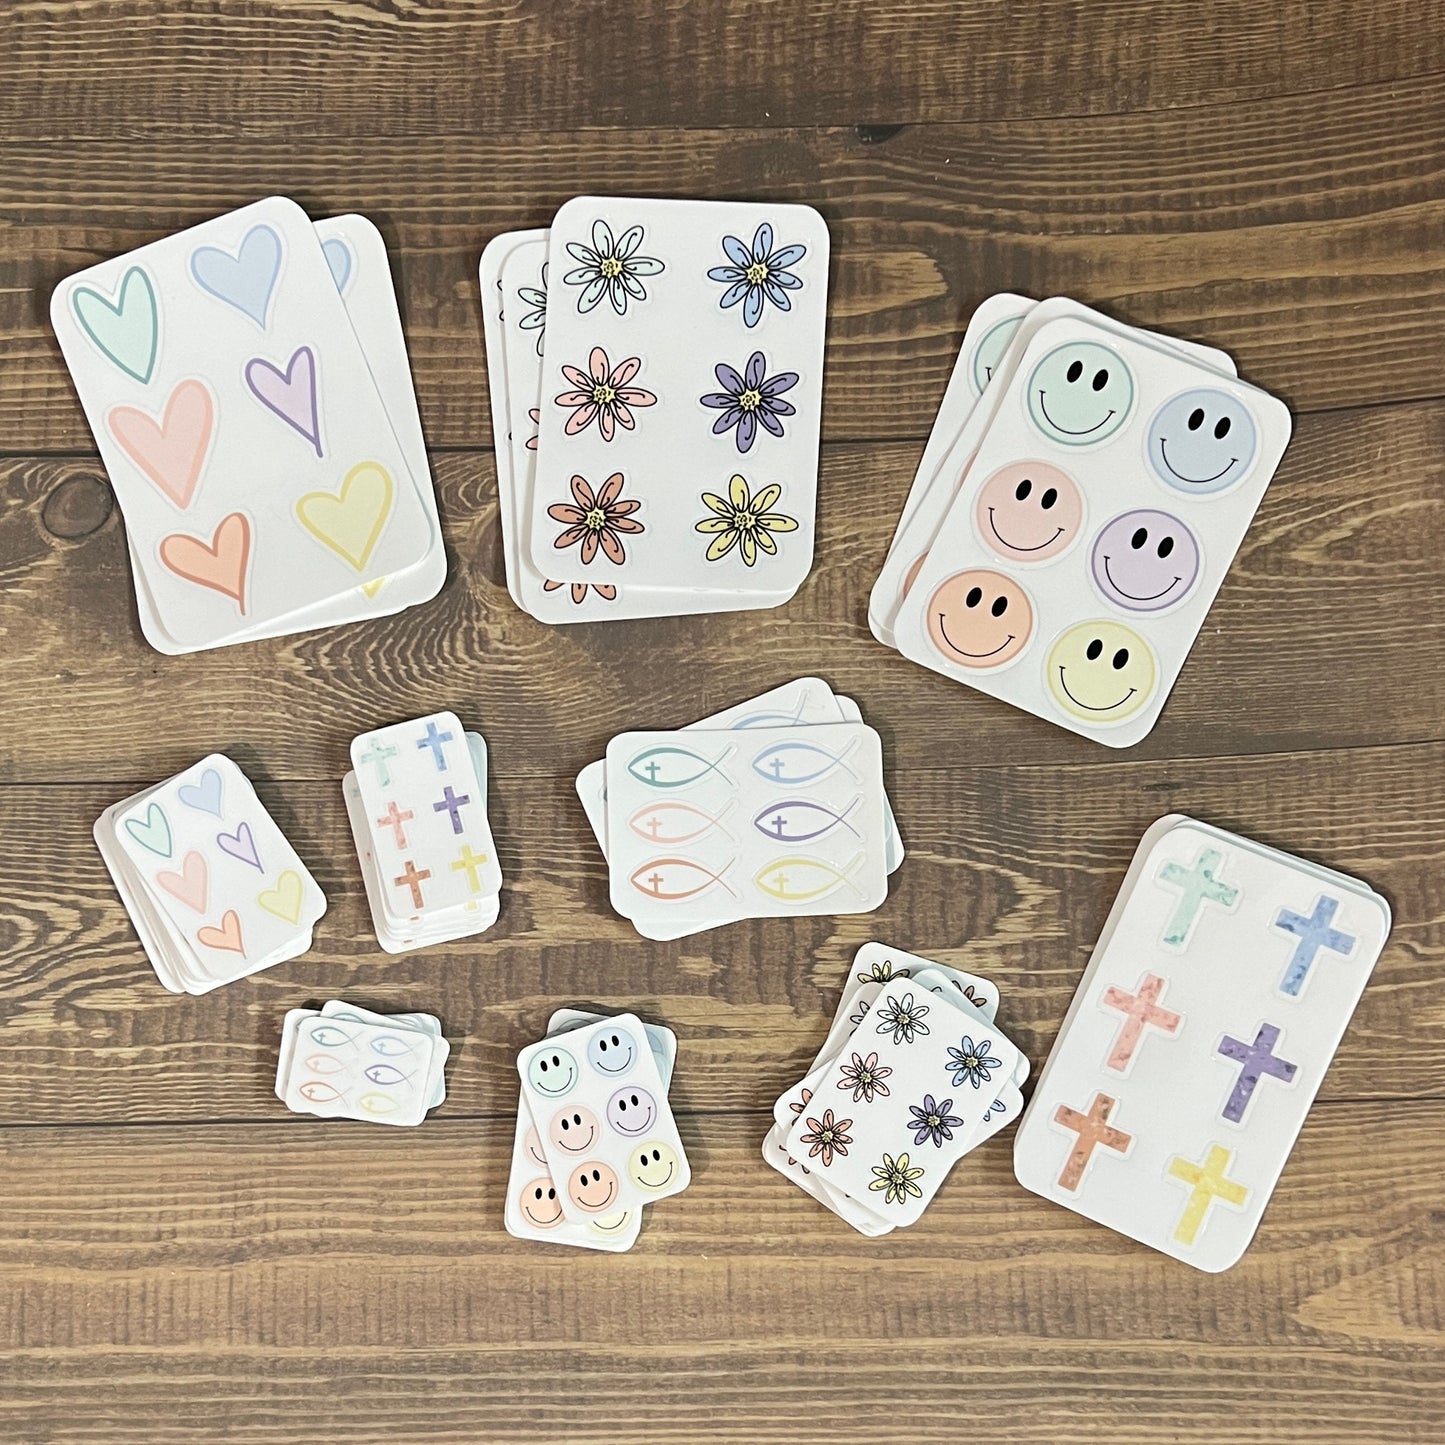 Tiny Stickers, 5 sheets, Journals, Planners | Choice of Design and Size | Heart, Cross, Happy Face, Christian Fish, Flower